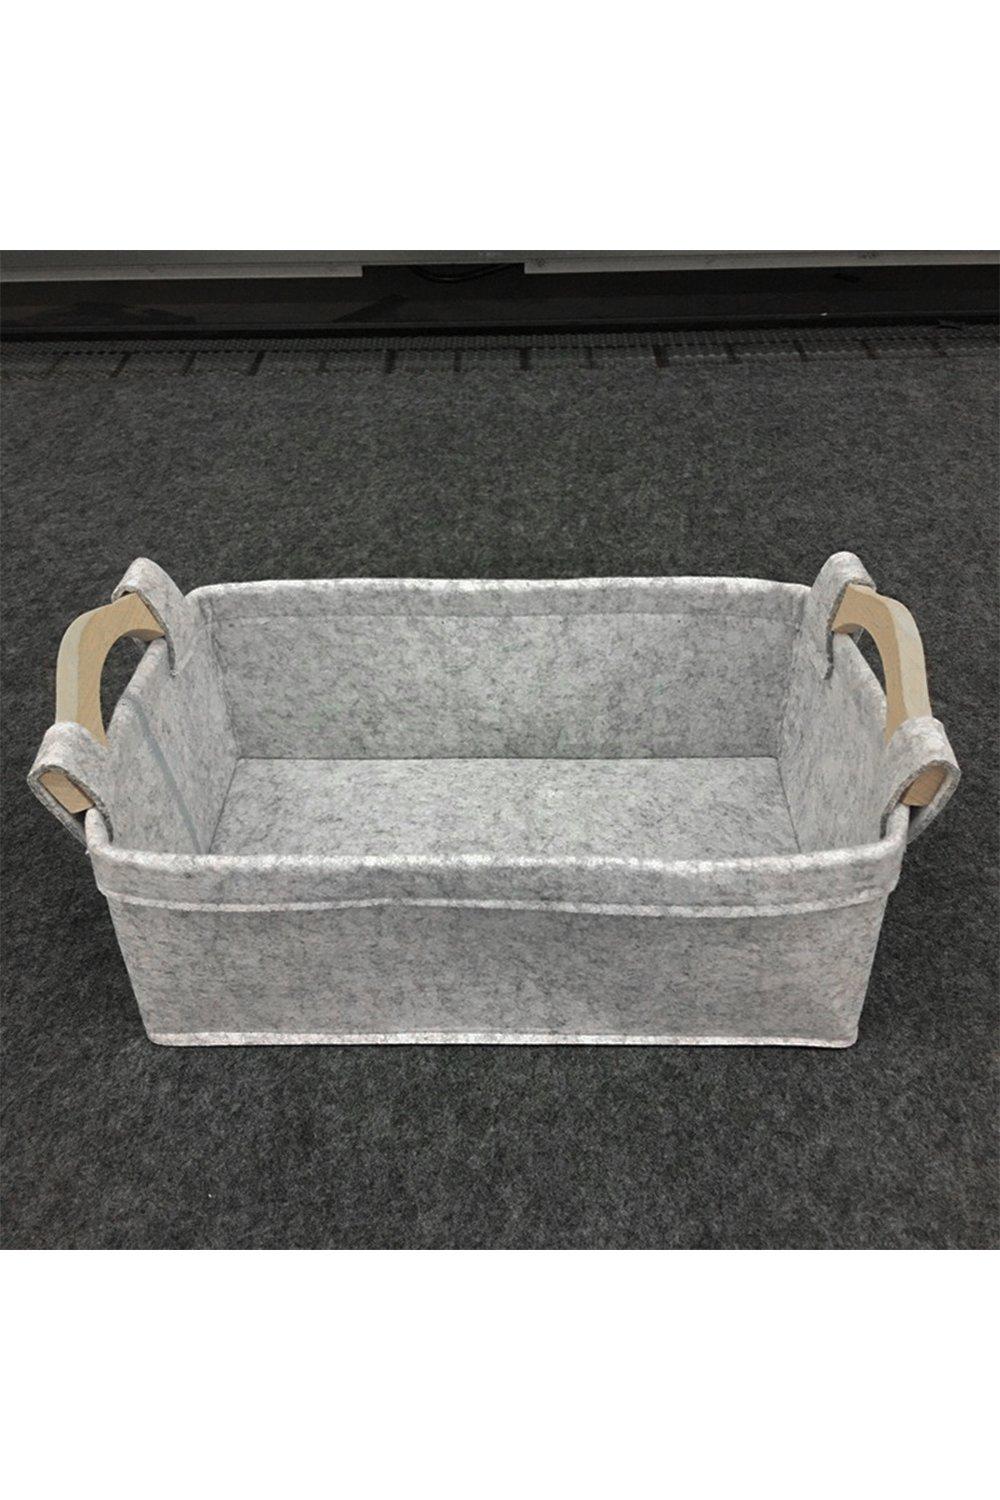 Foldable Storage Box Bathroom Laundry Basket With Wooden Handles